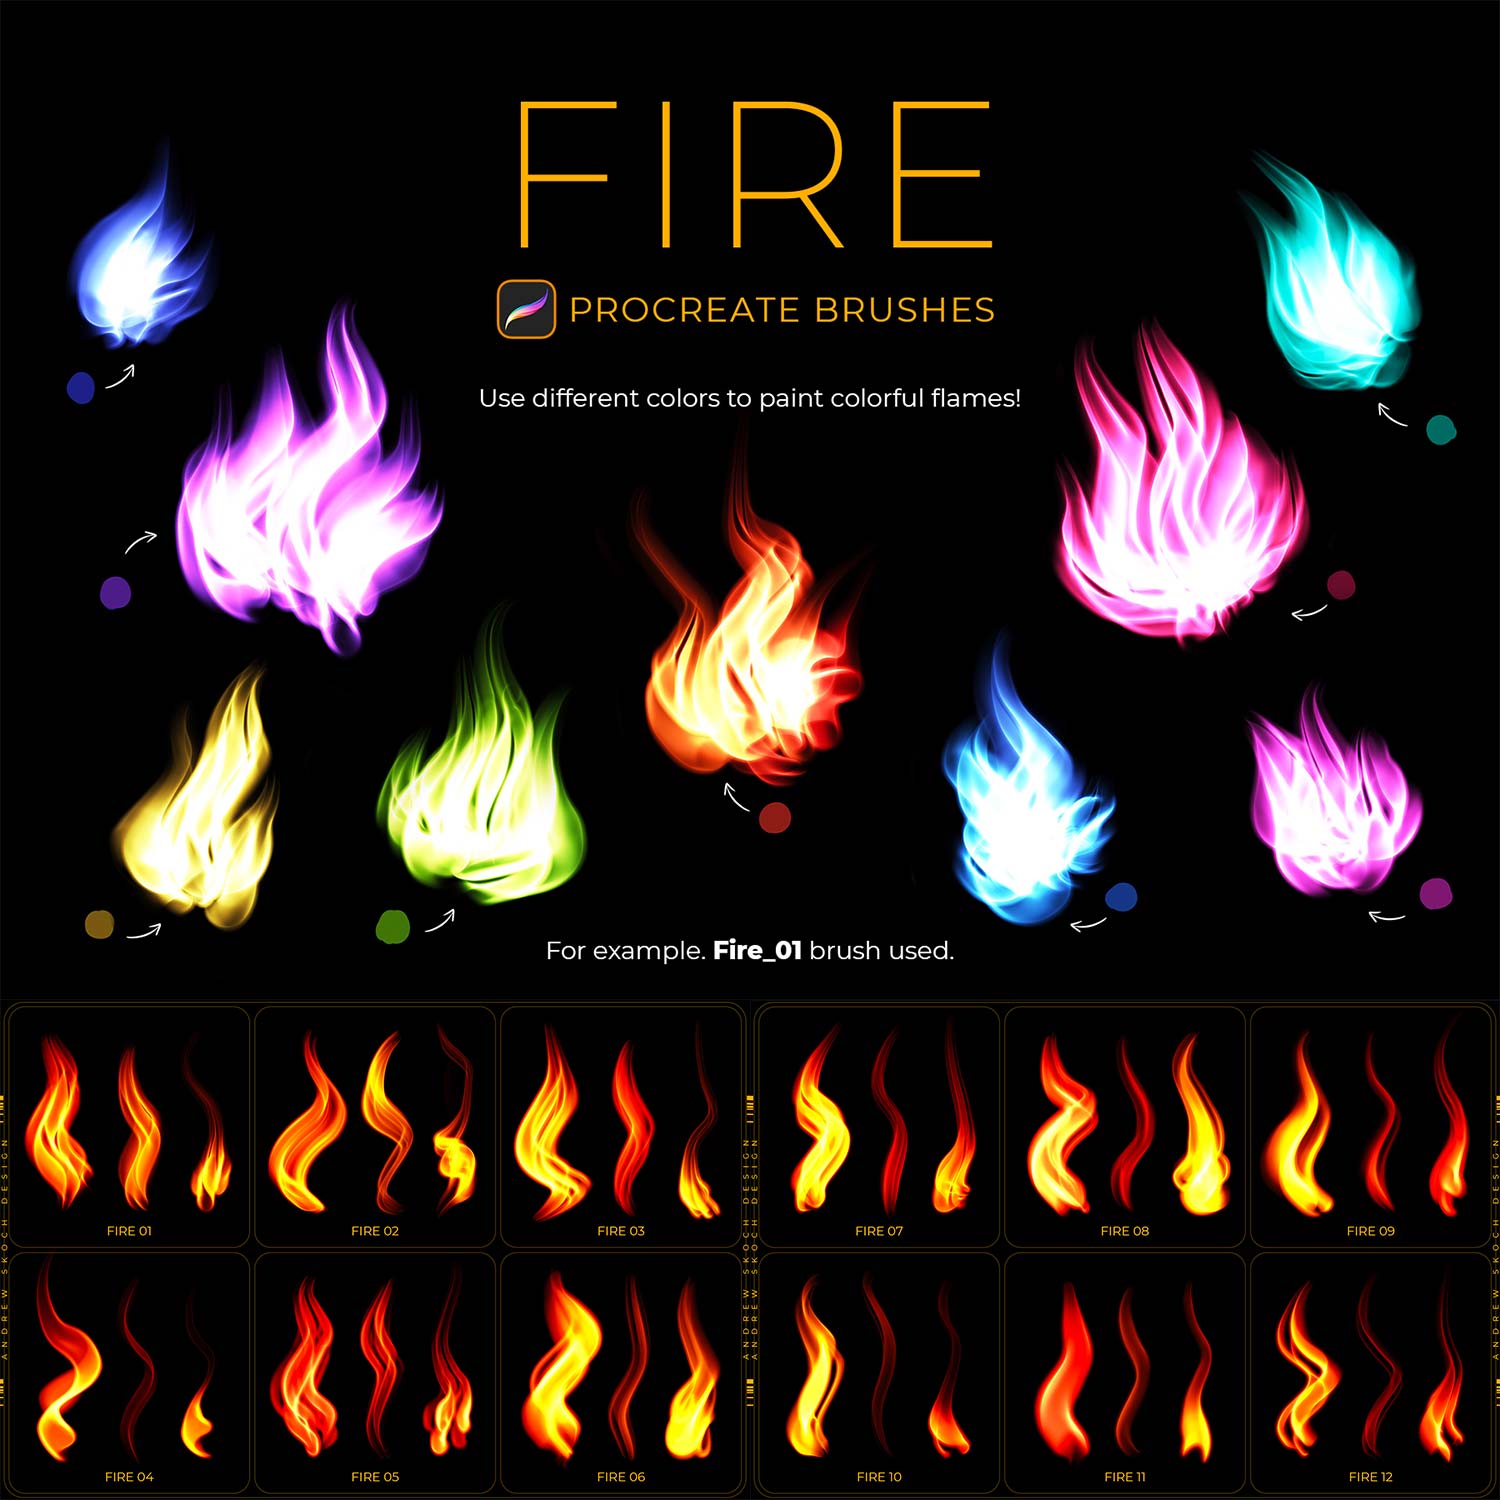 Fire Procreate Brushes cover image.